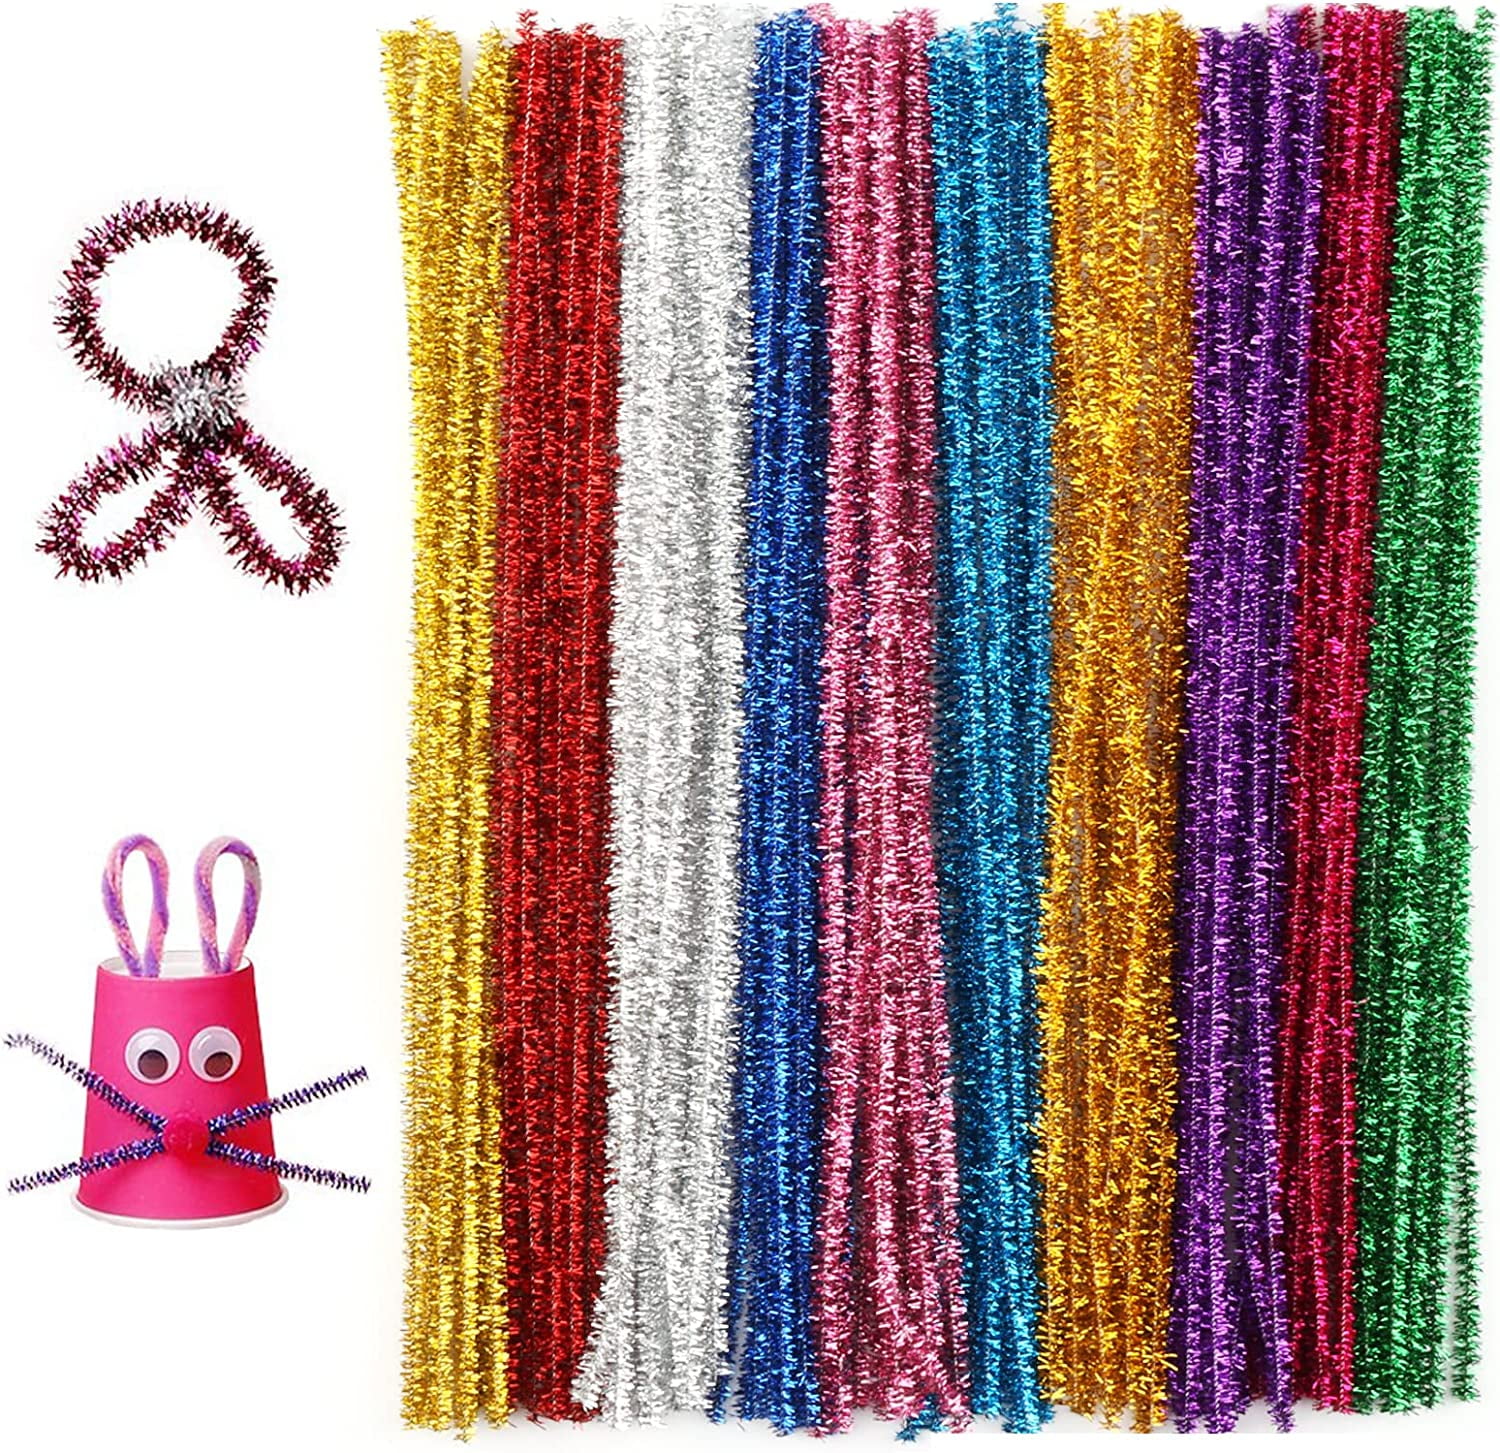 12L x 6mm Chenille Stems (Brown Pipe Cleaners)